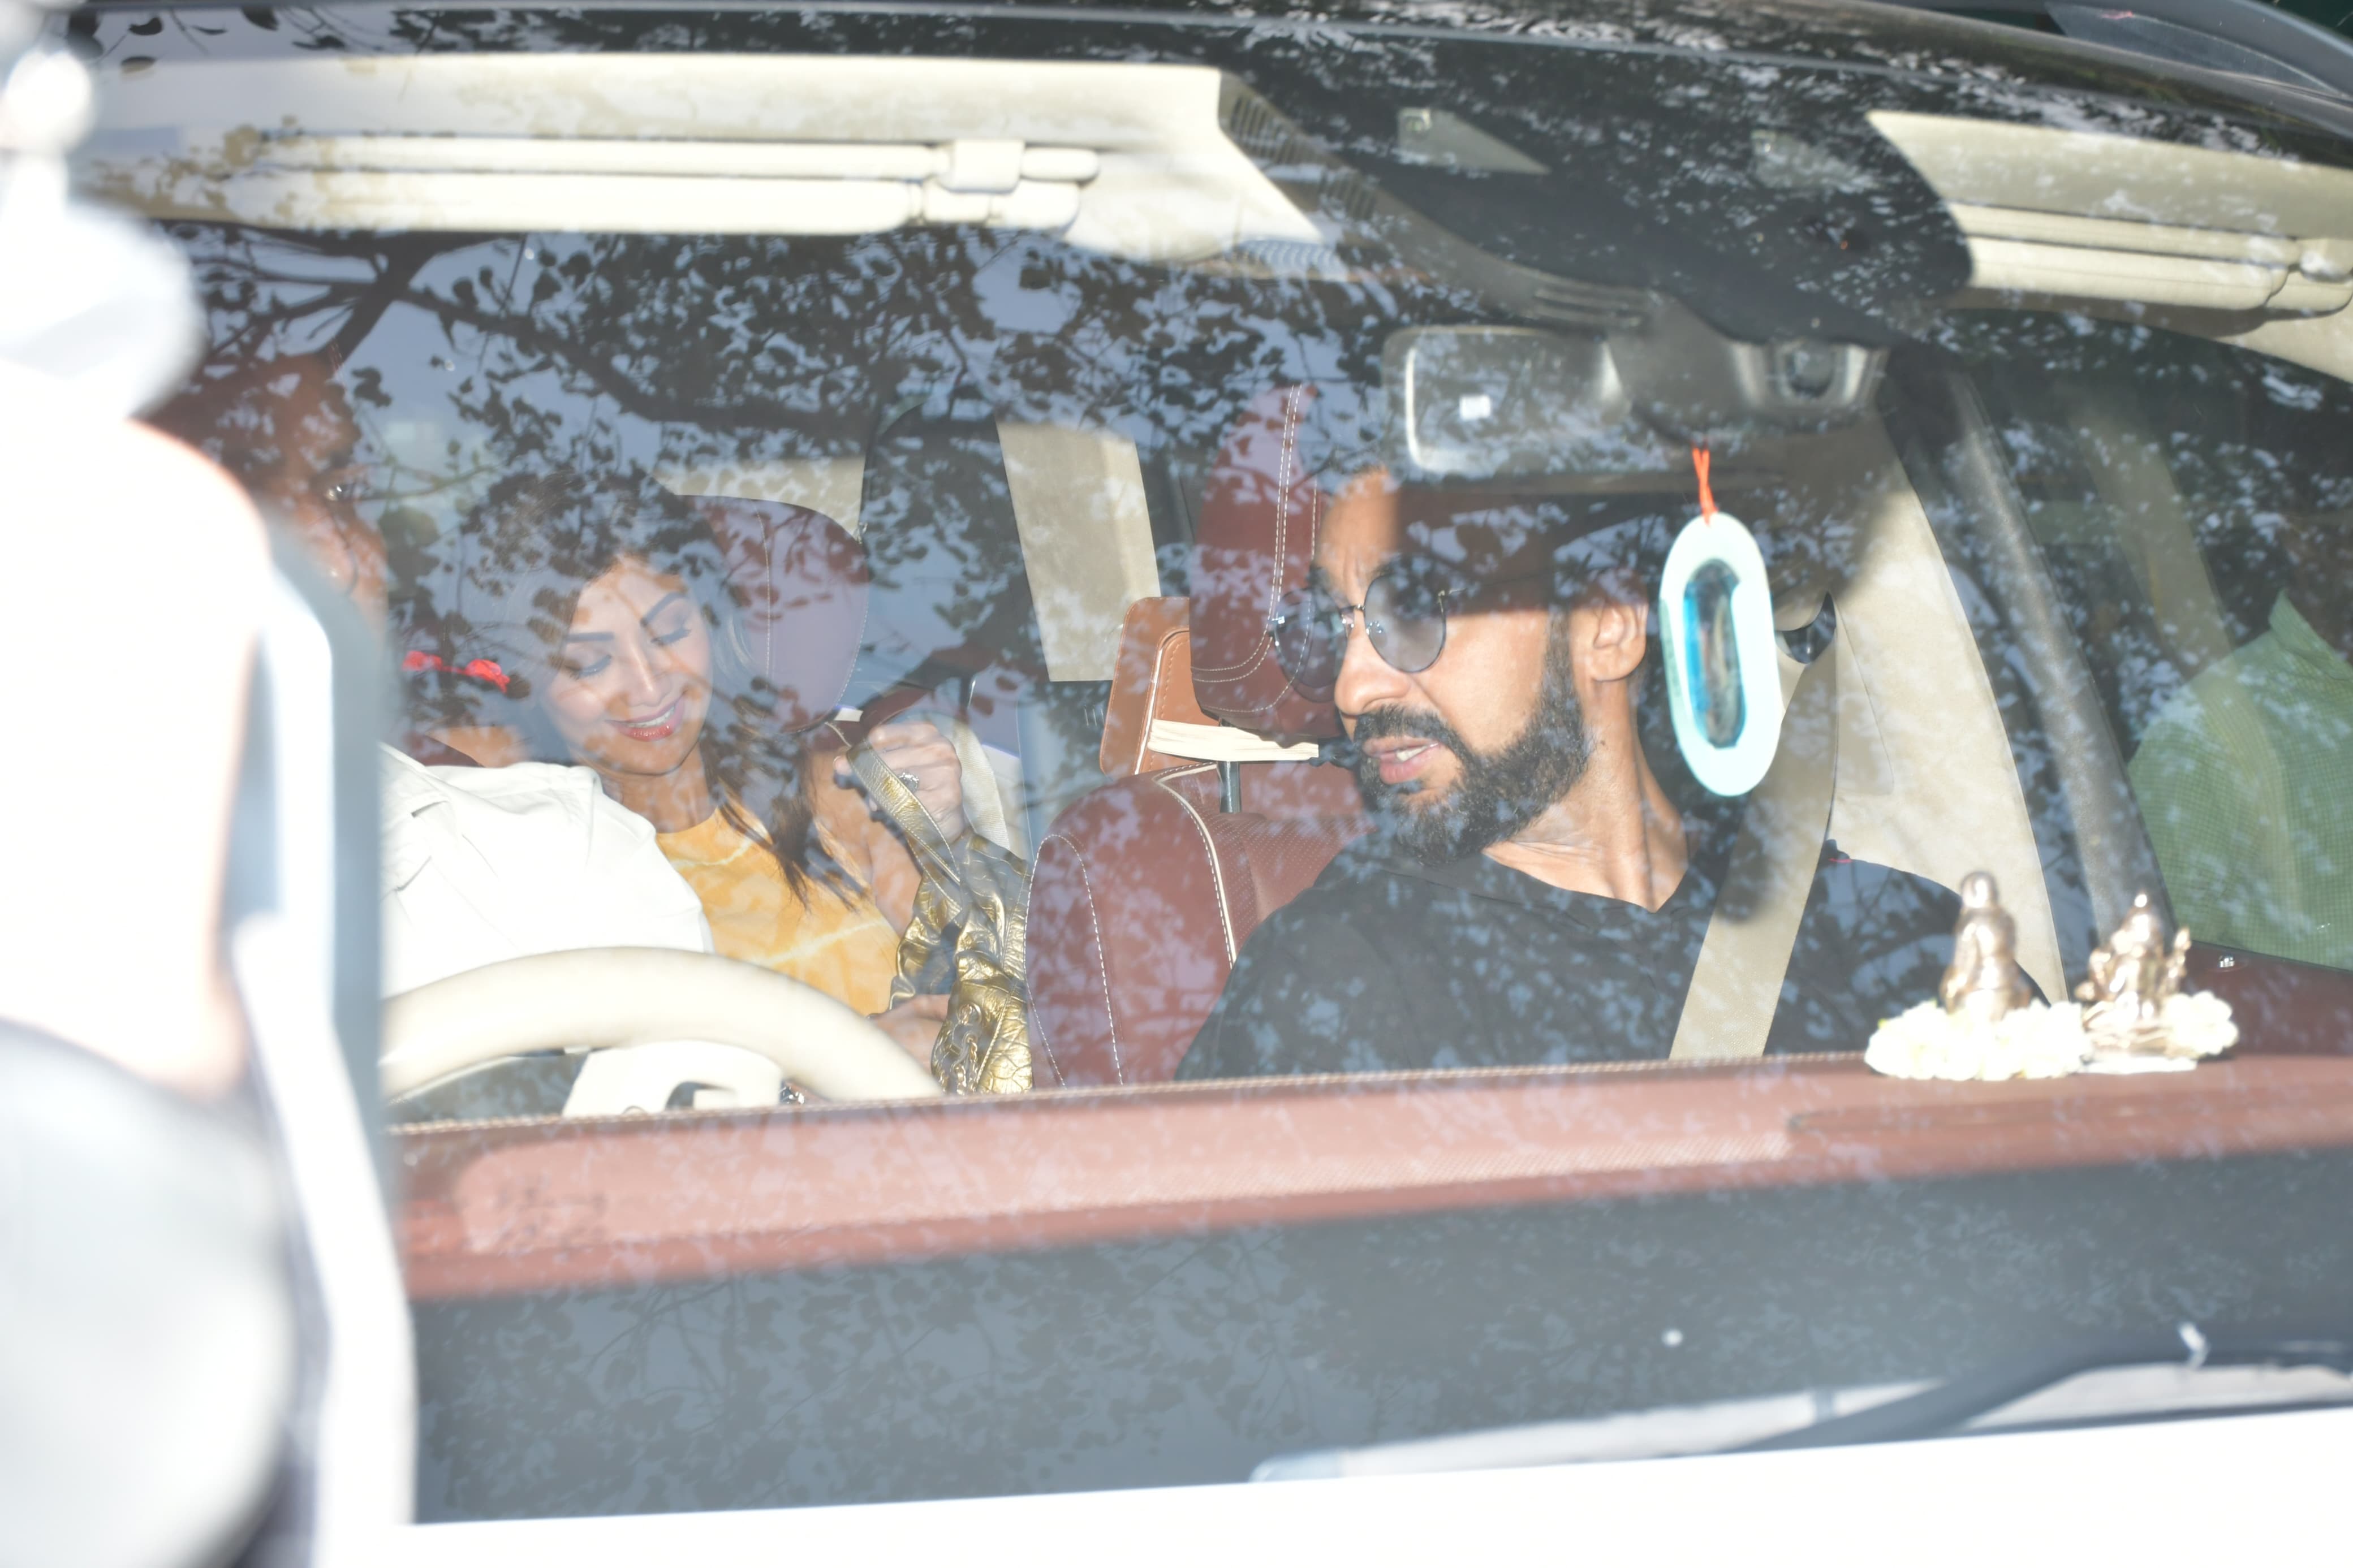 Raj Kundra and Shilpa Shetty were spotted leaving in their car